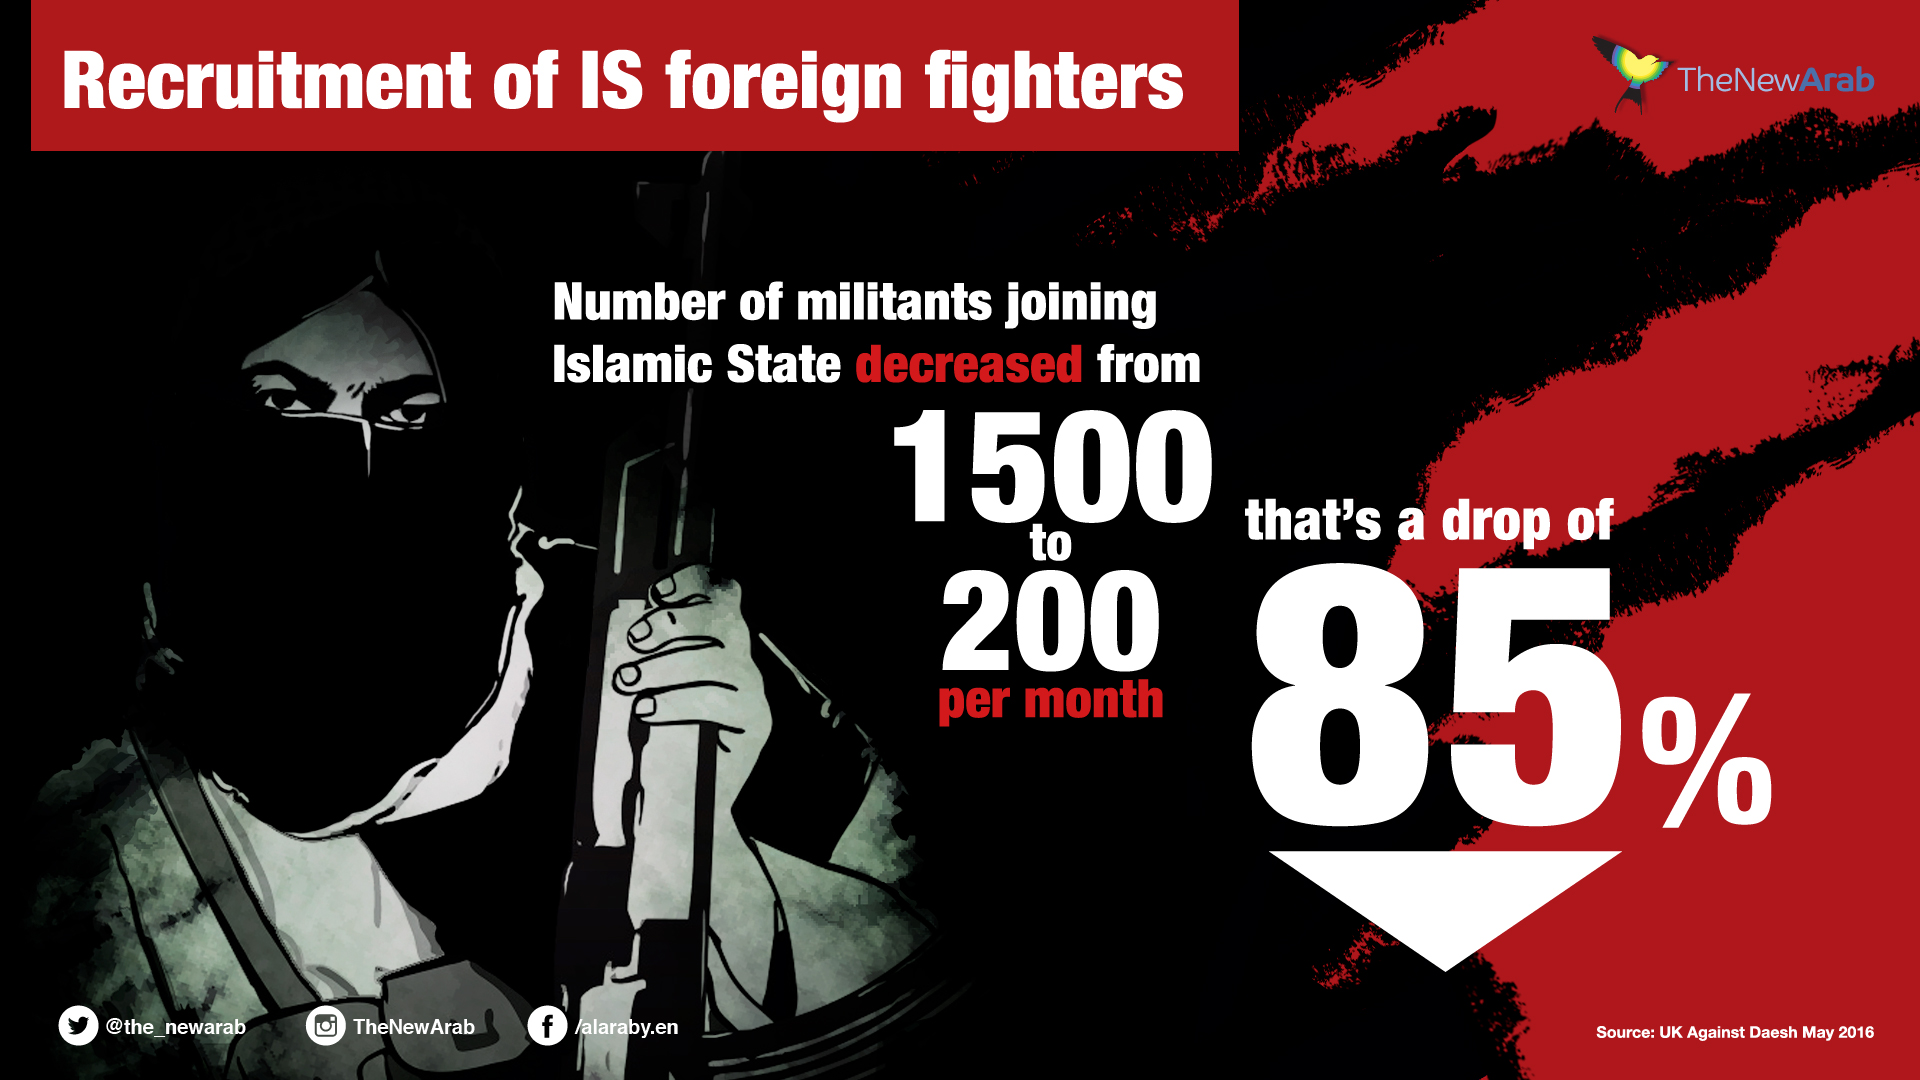 foreign-fighters recruitment ad-01.jpg